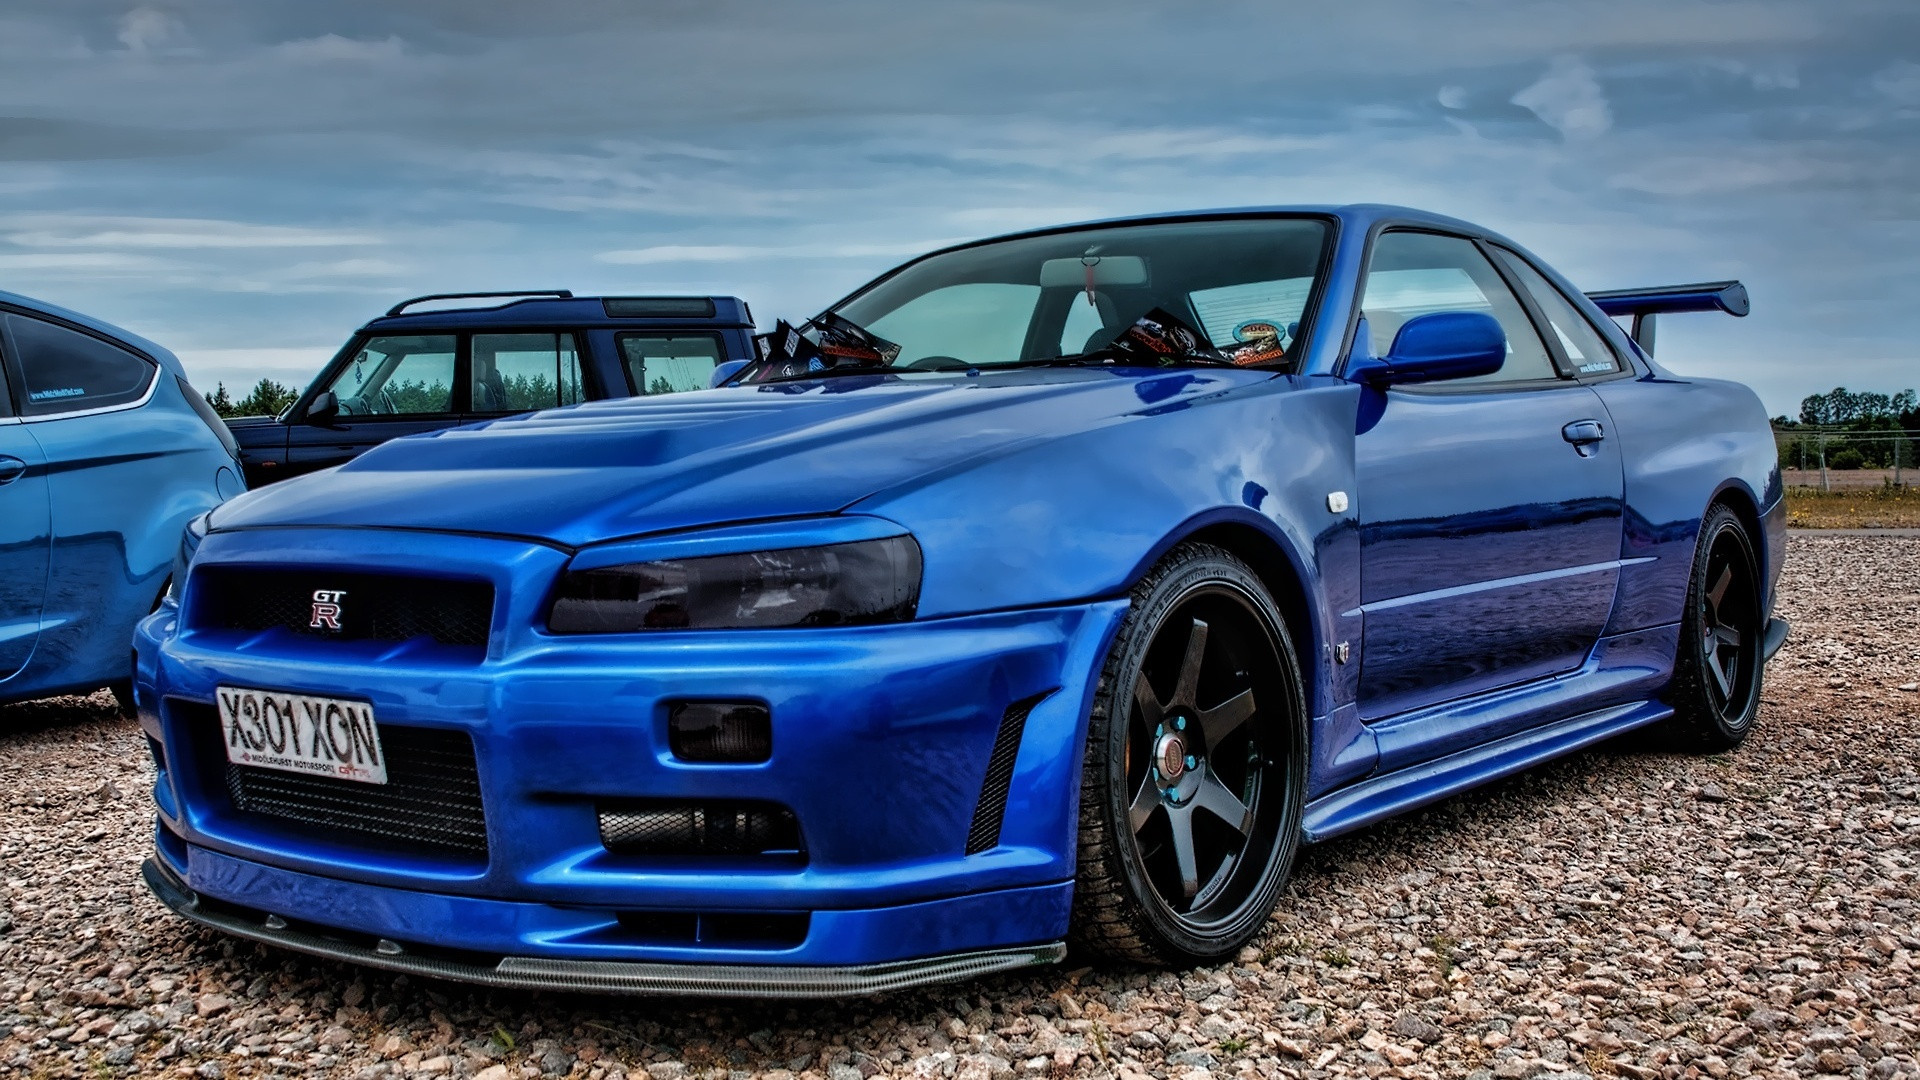 Free Download Skyline Gtr R34 Wallpapers 1920x1080 For Your